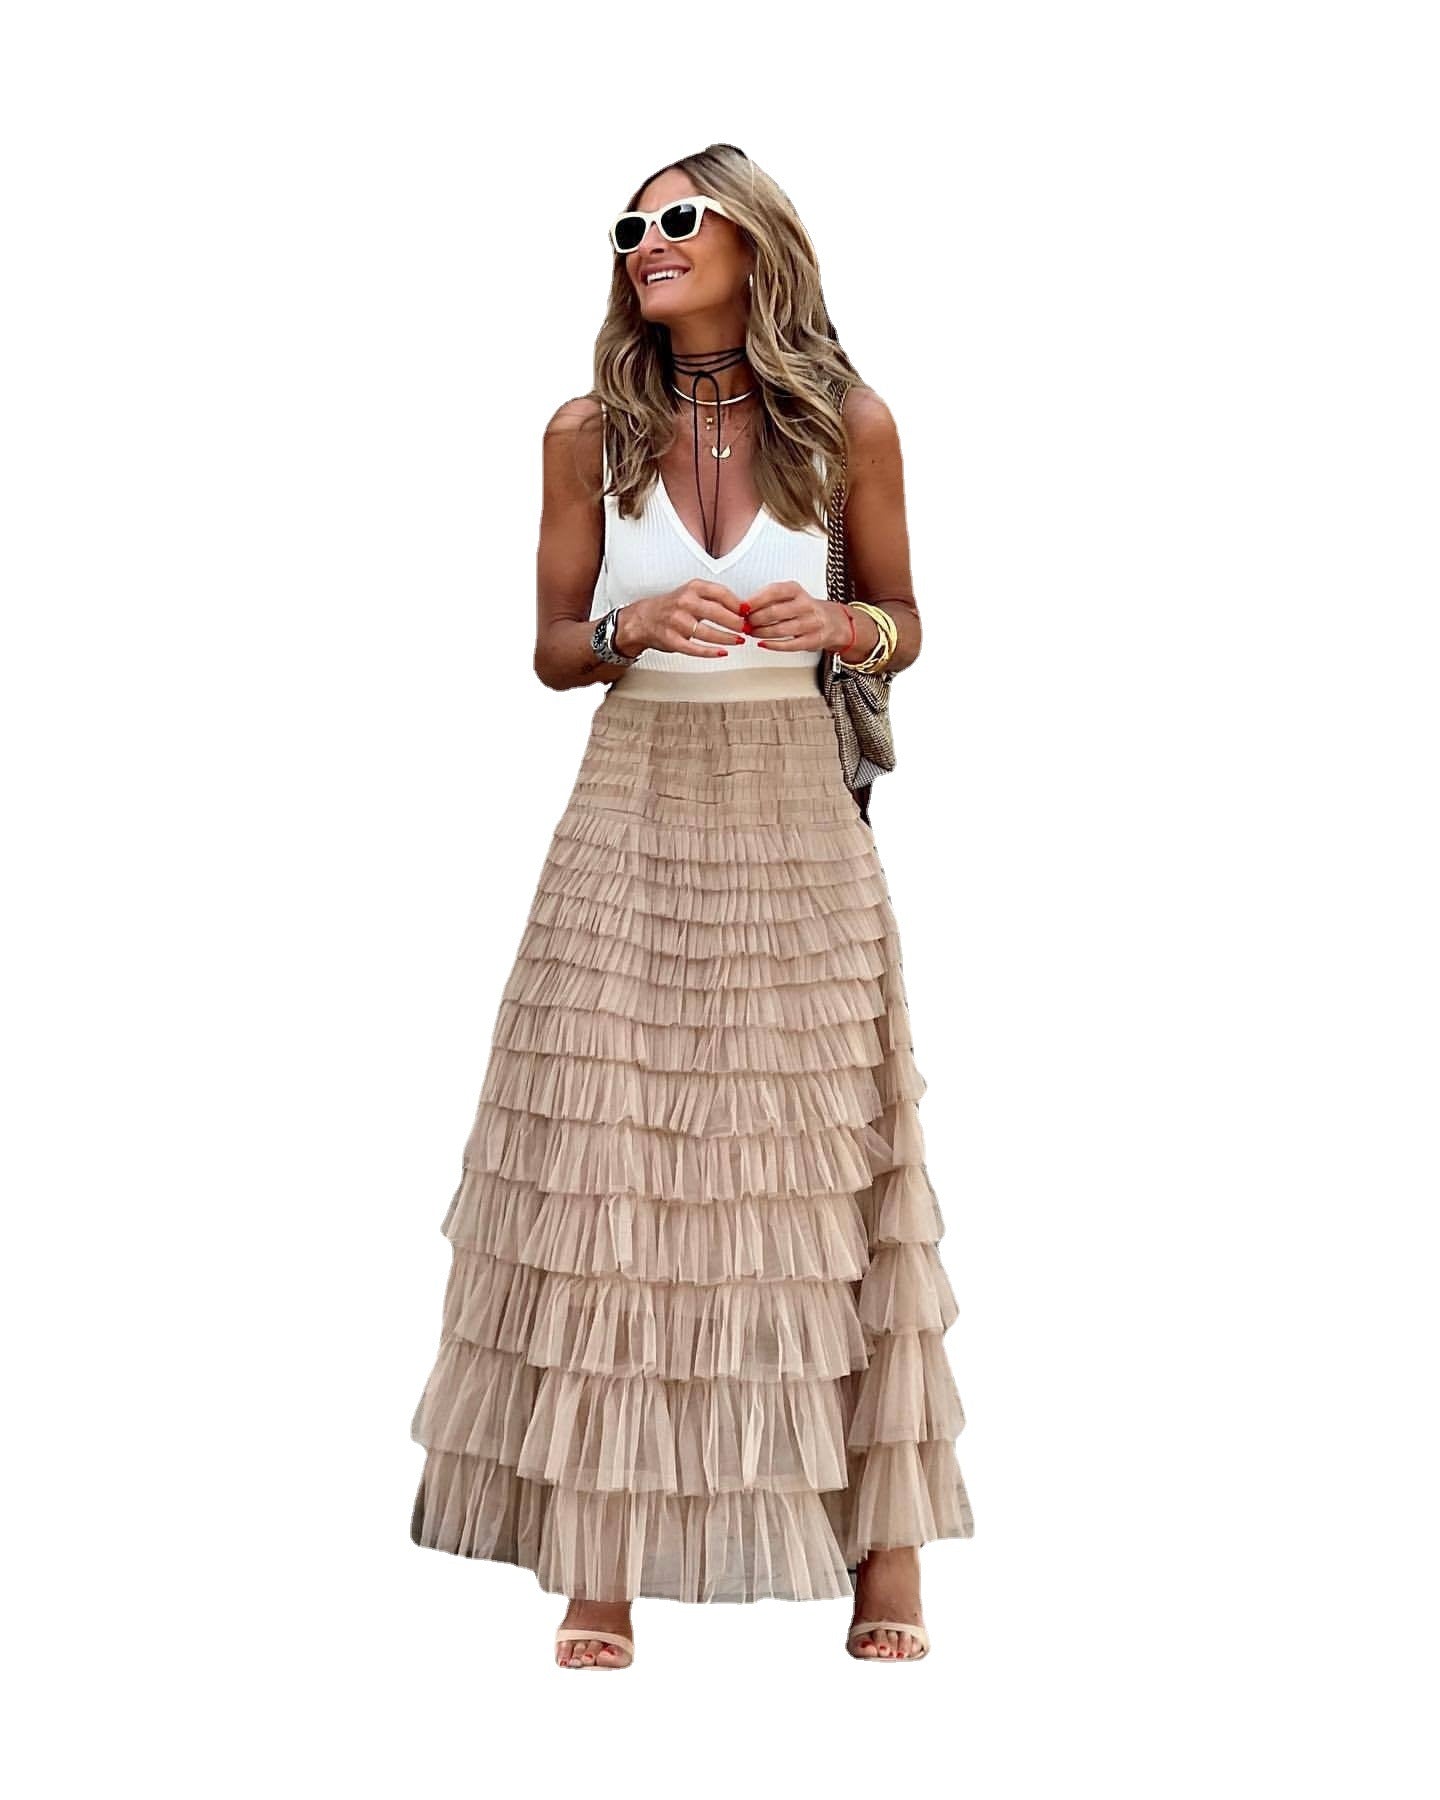 Women's Cool Summer Fashion Mesh Tiered Skirts